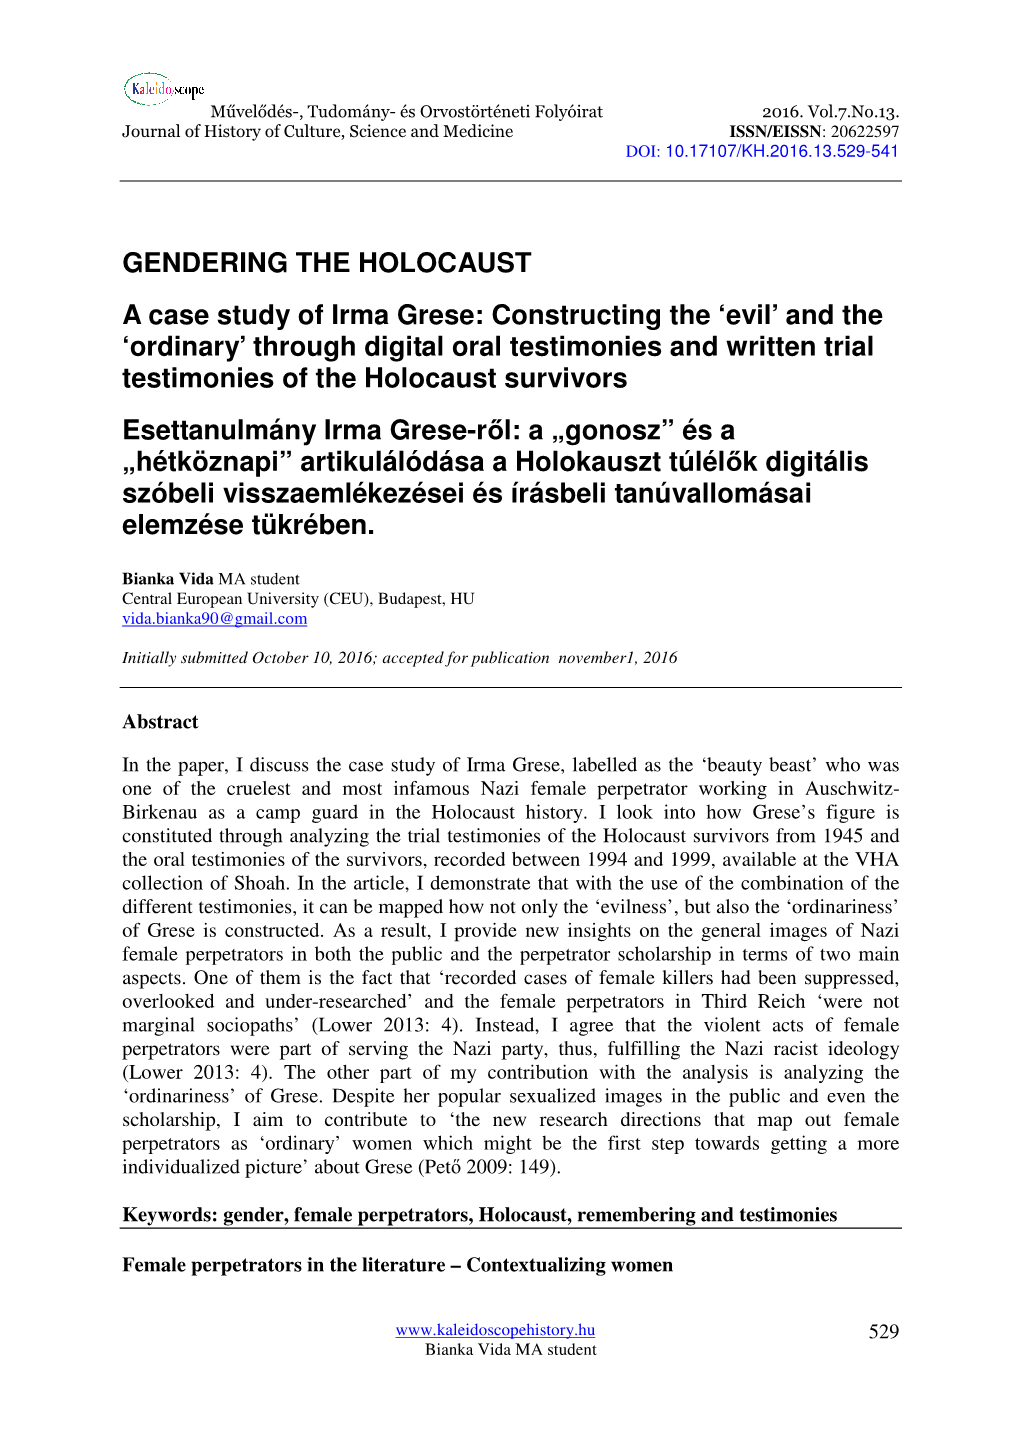 GENDERING the HOLOCAUST a Case Study of Irma Grese